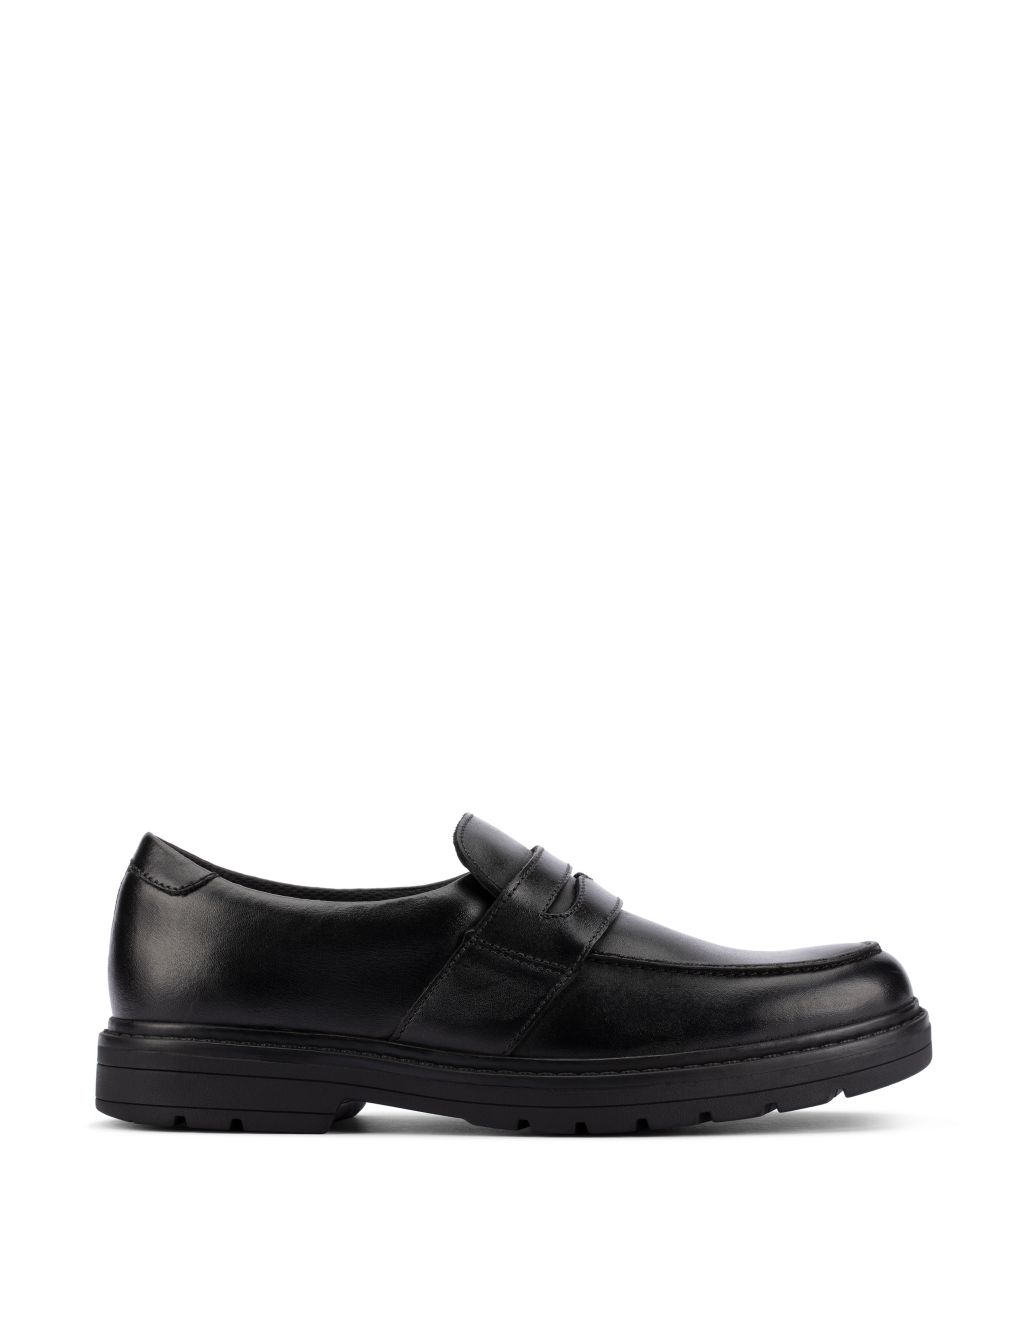 Kids' Leather Slip-On Loafers (3 Small - 7 Small) image 1